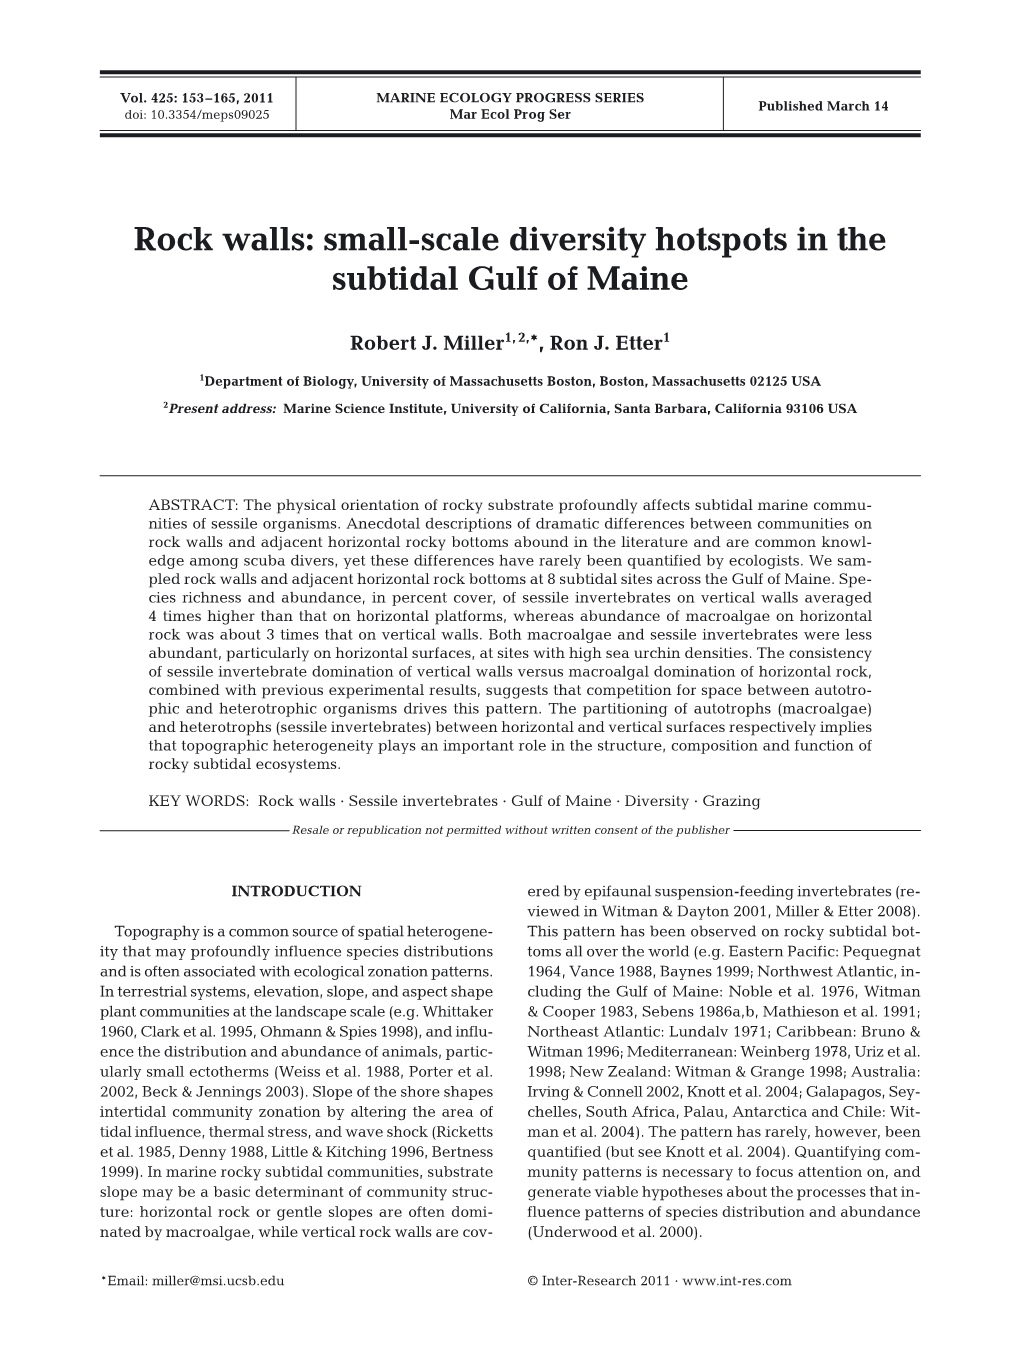 Rock Walls: Small-Scale Diversity Hotspots in the Subtidal Gulf of Maine